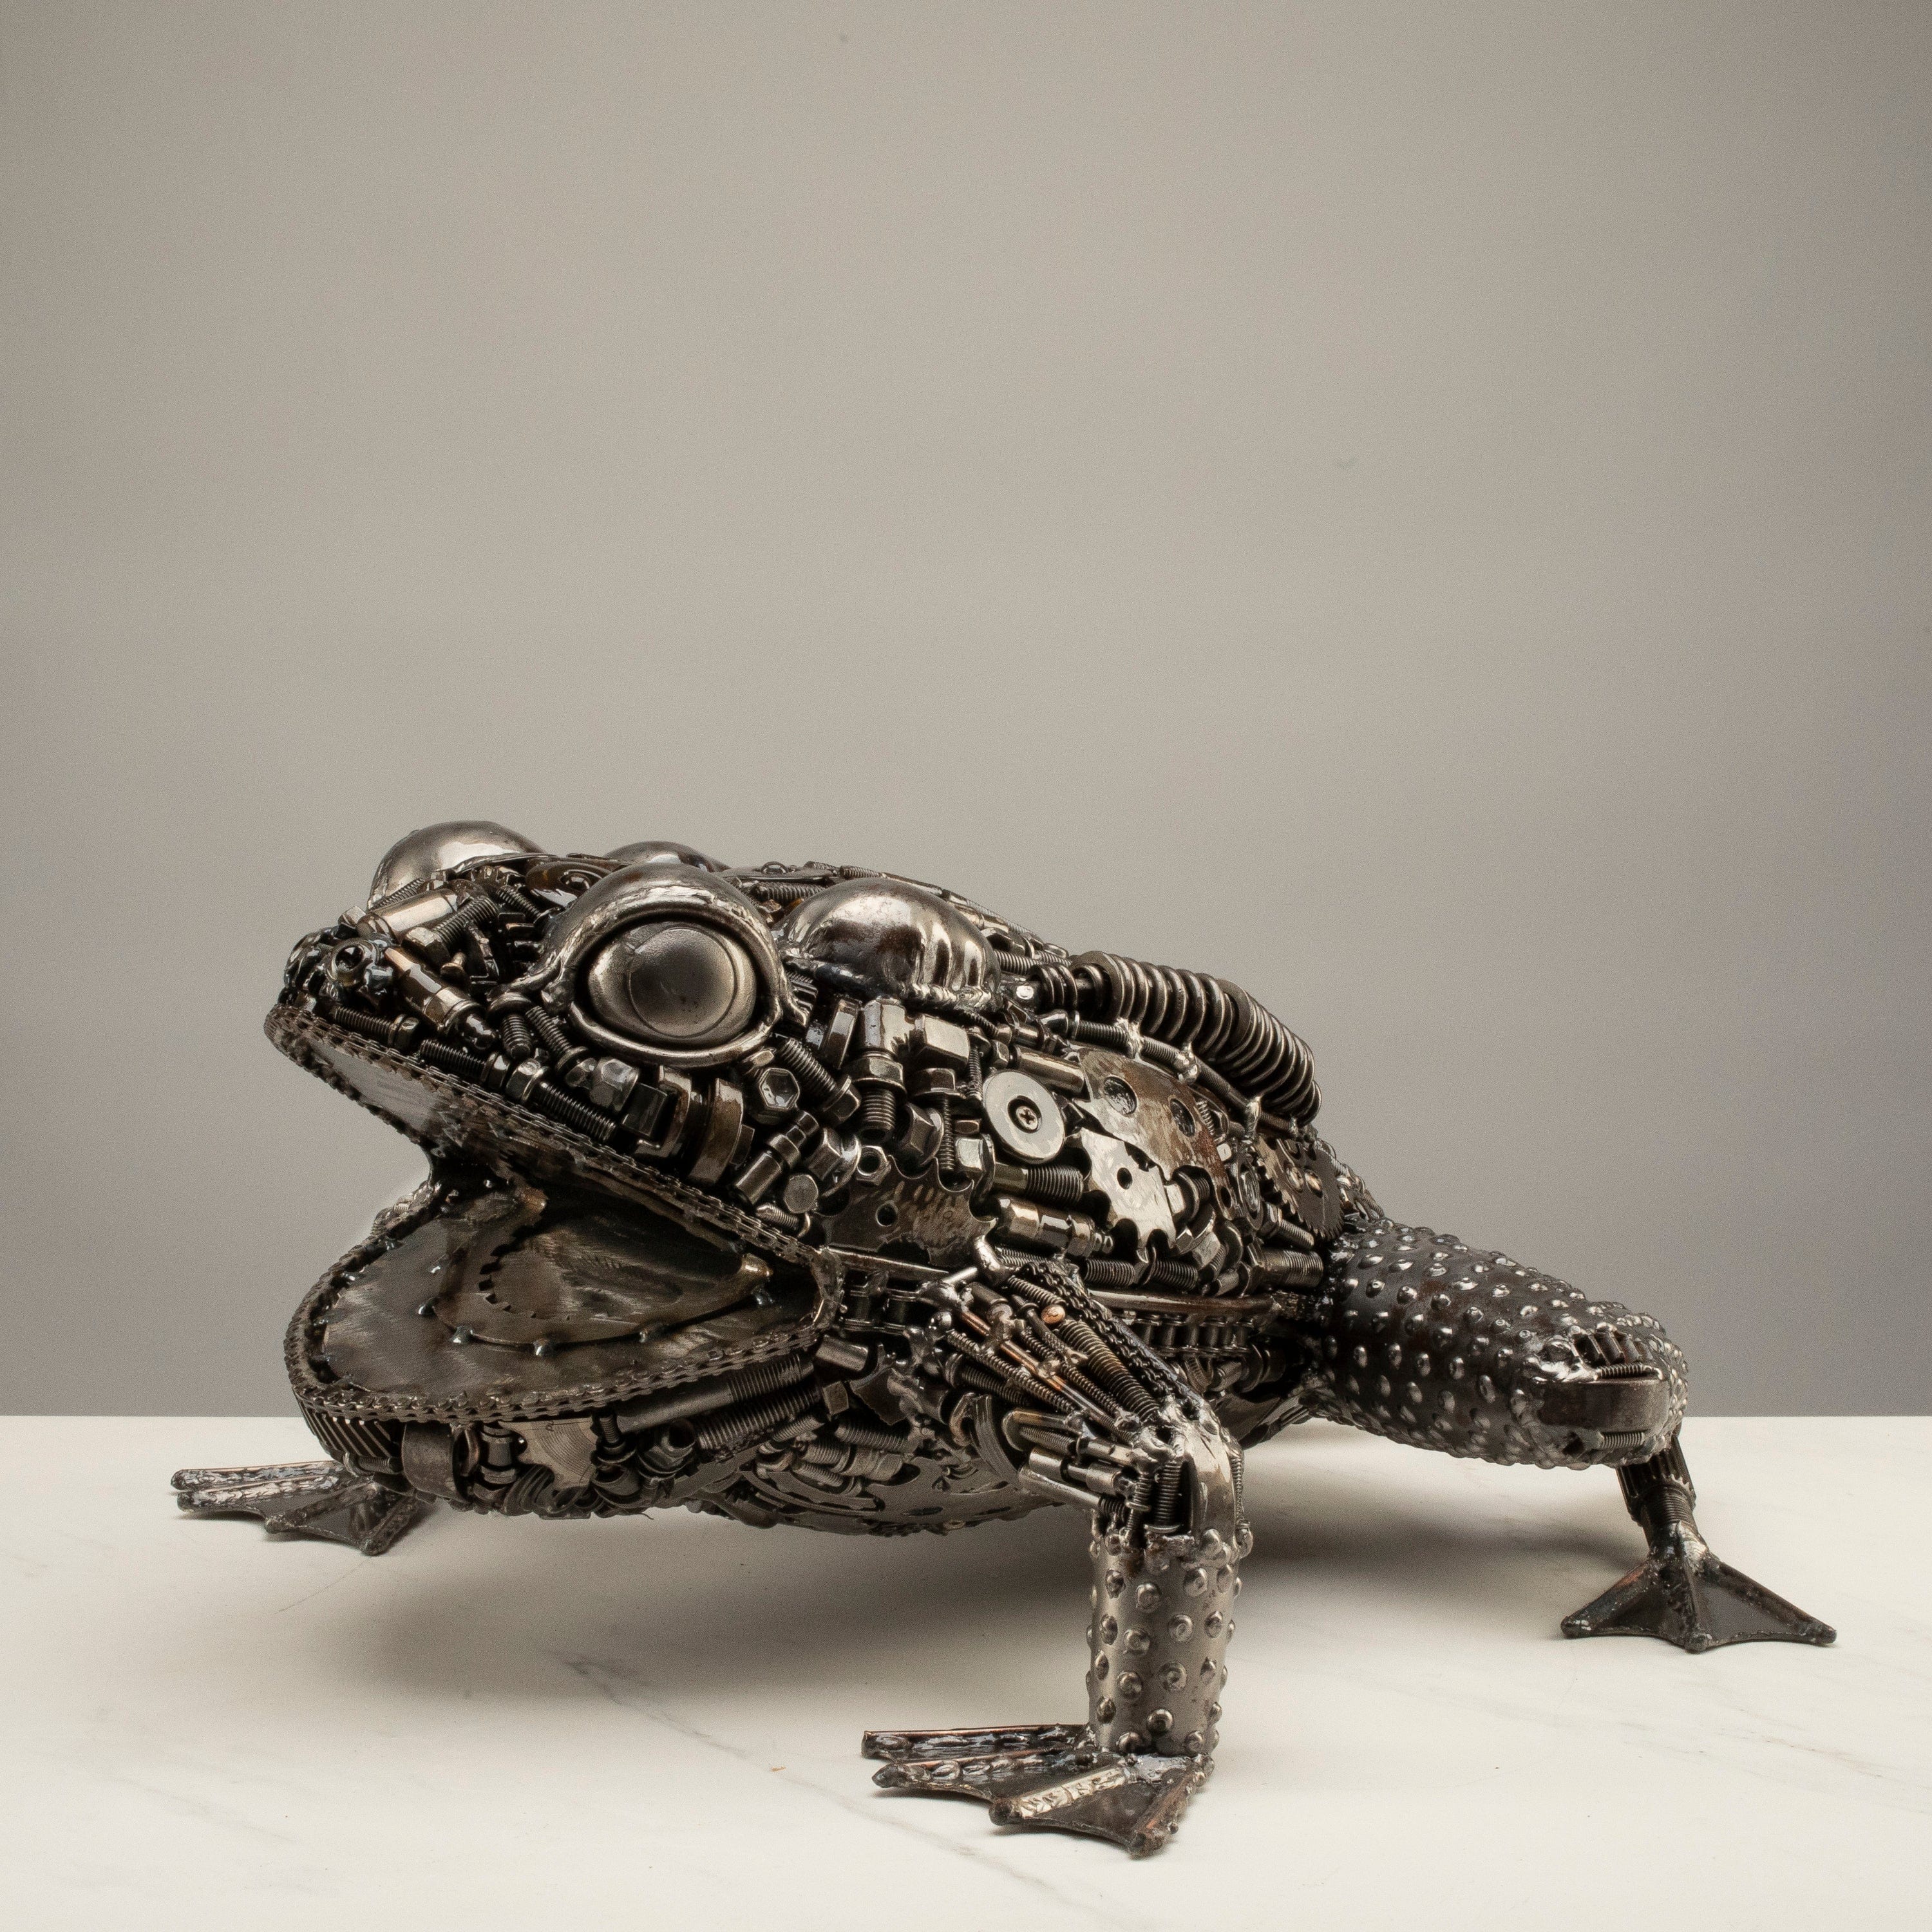 KALIFANO Recycled Metal Art 20" Frog Inspired Recycled Metal Art Sculpture RMS-FR53x23-PK